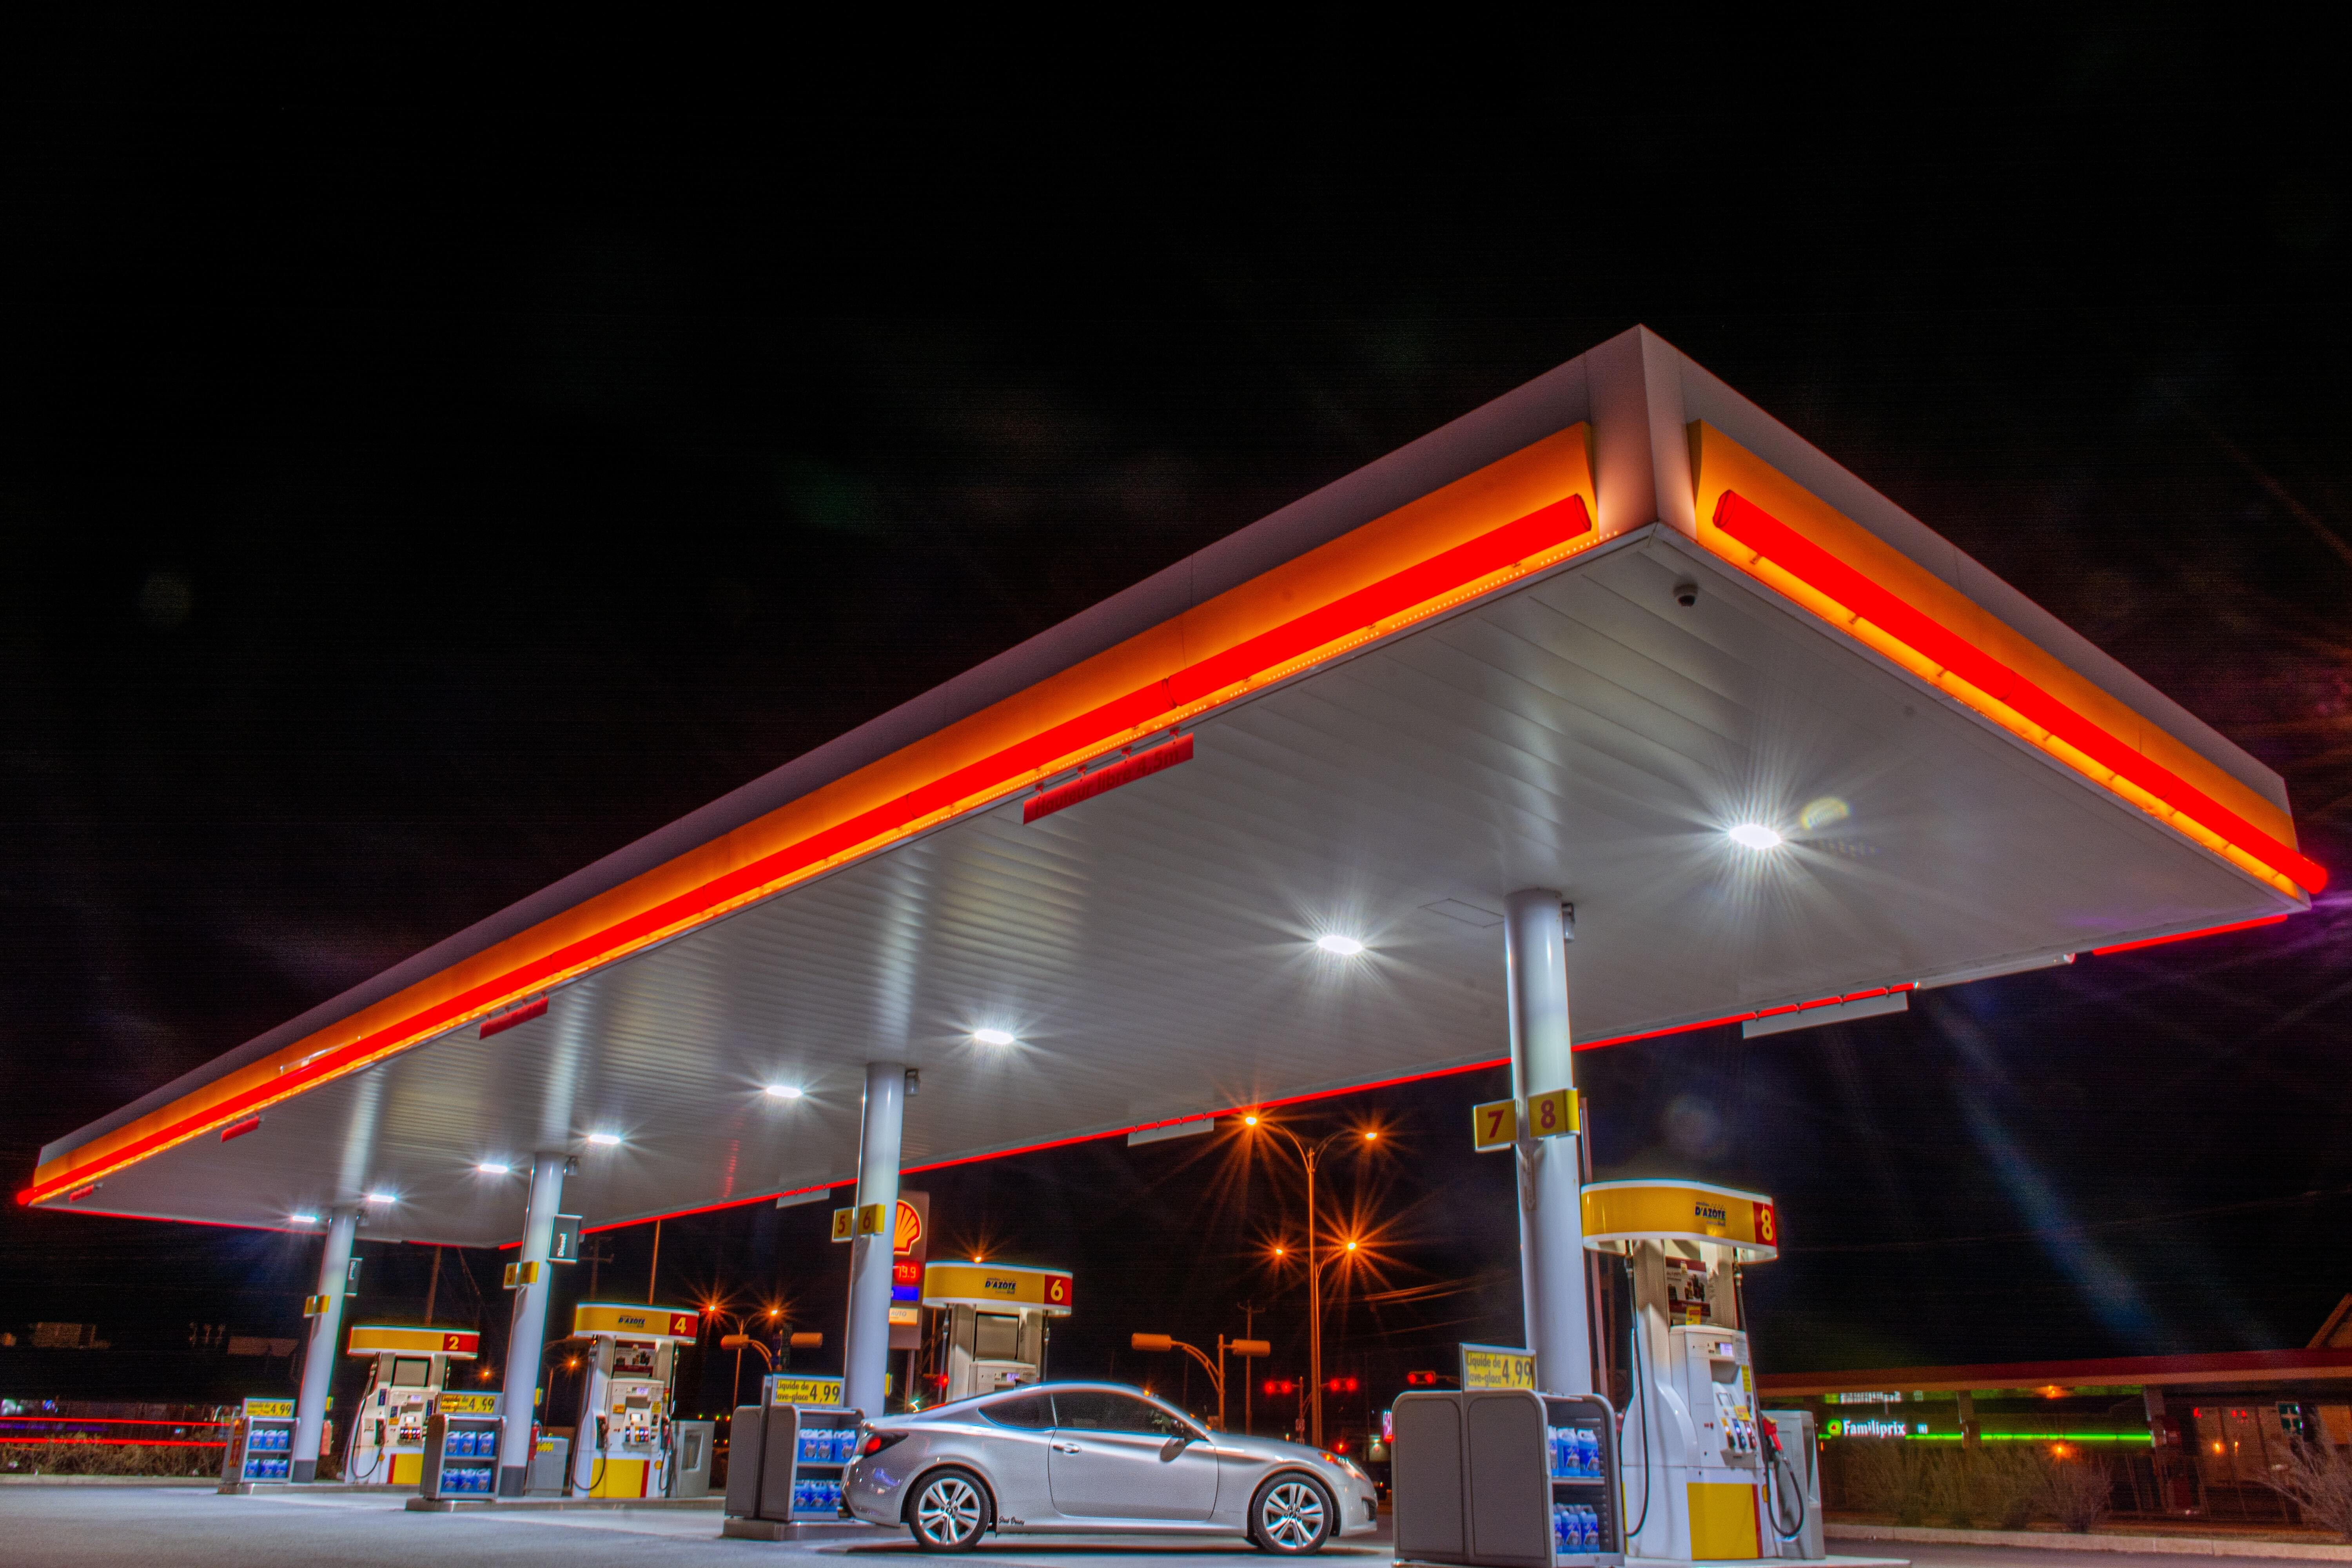 Photo of a gas station at night time.